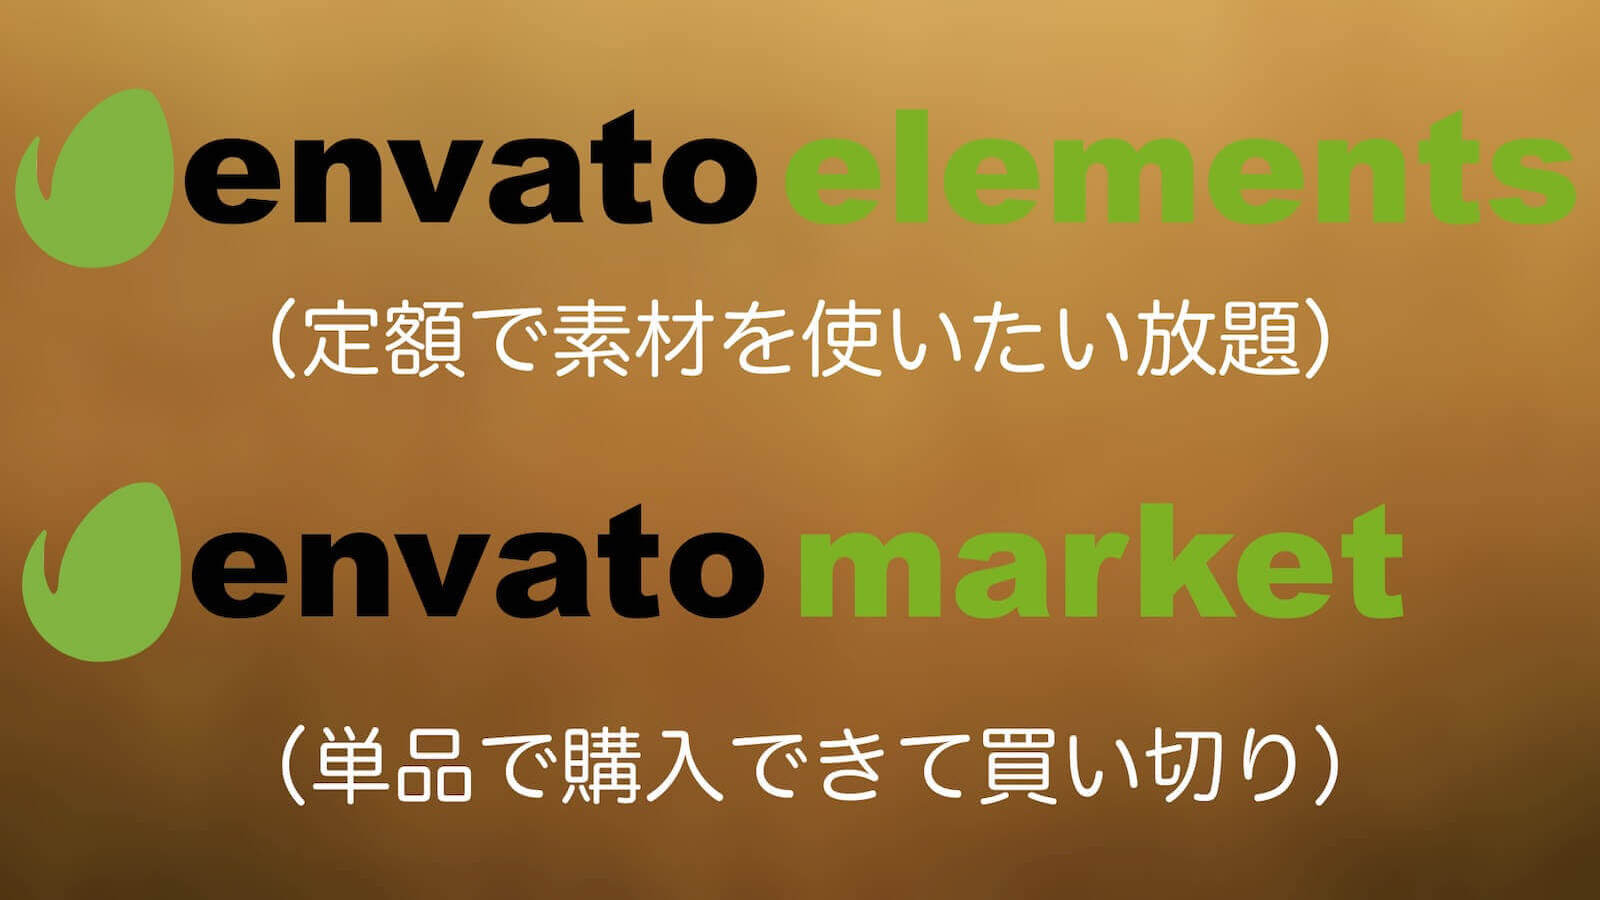 Difference between envato elements and market